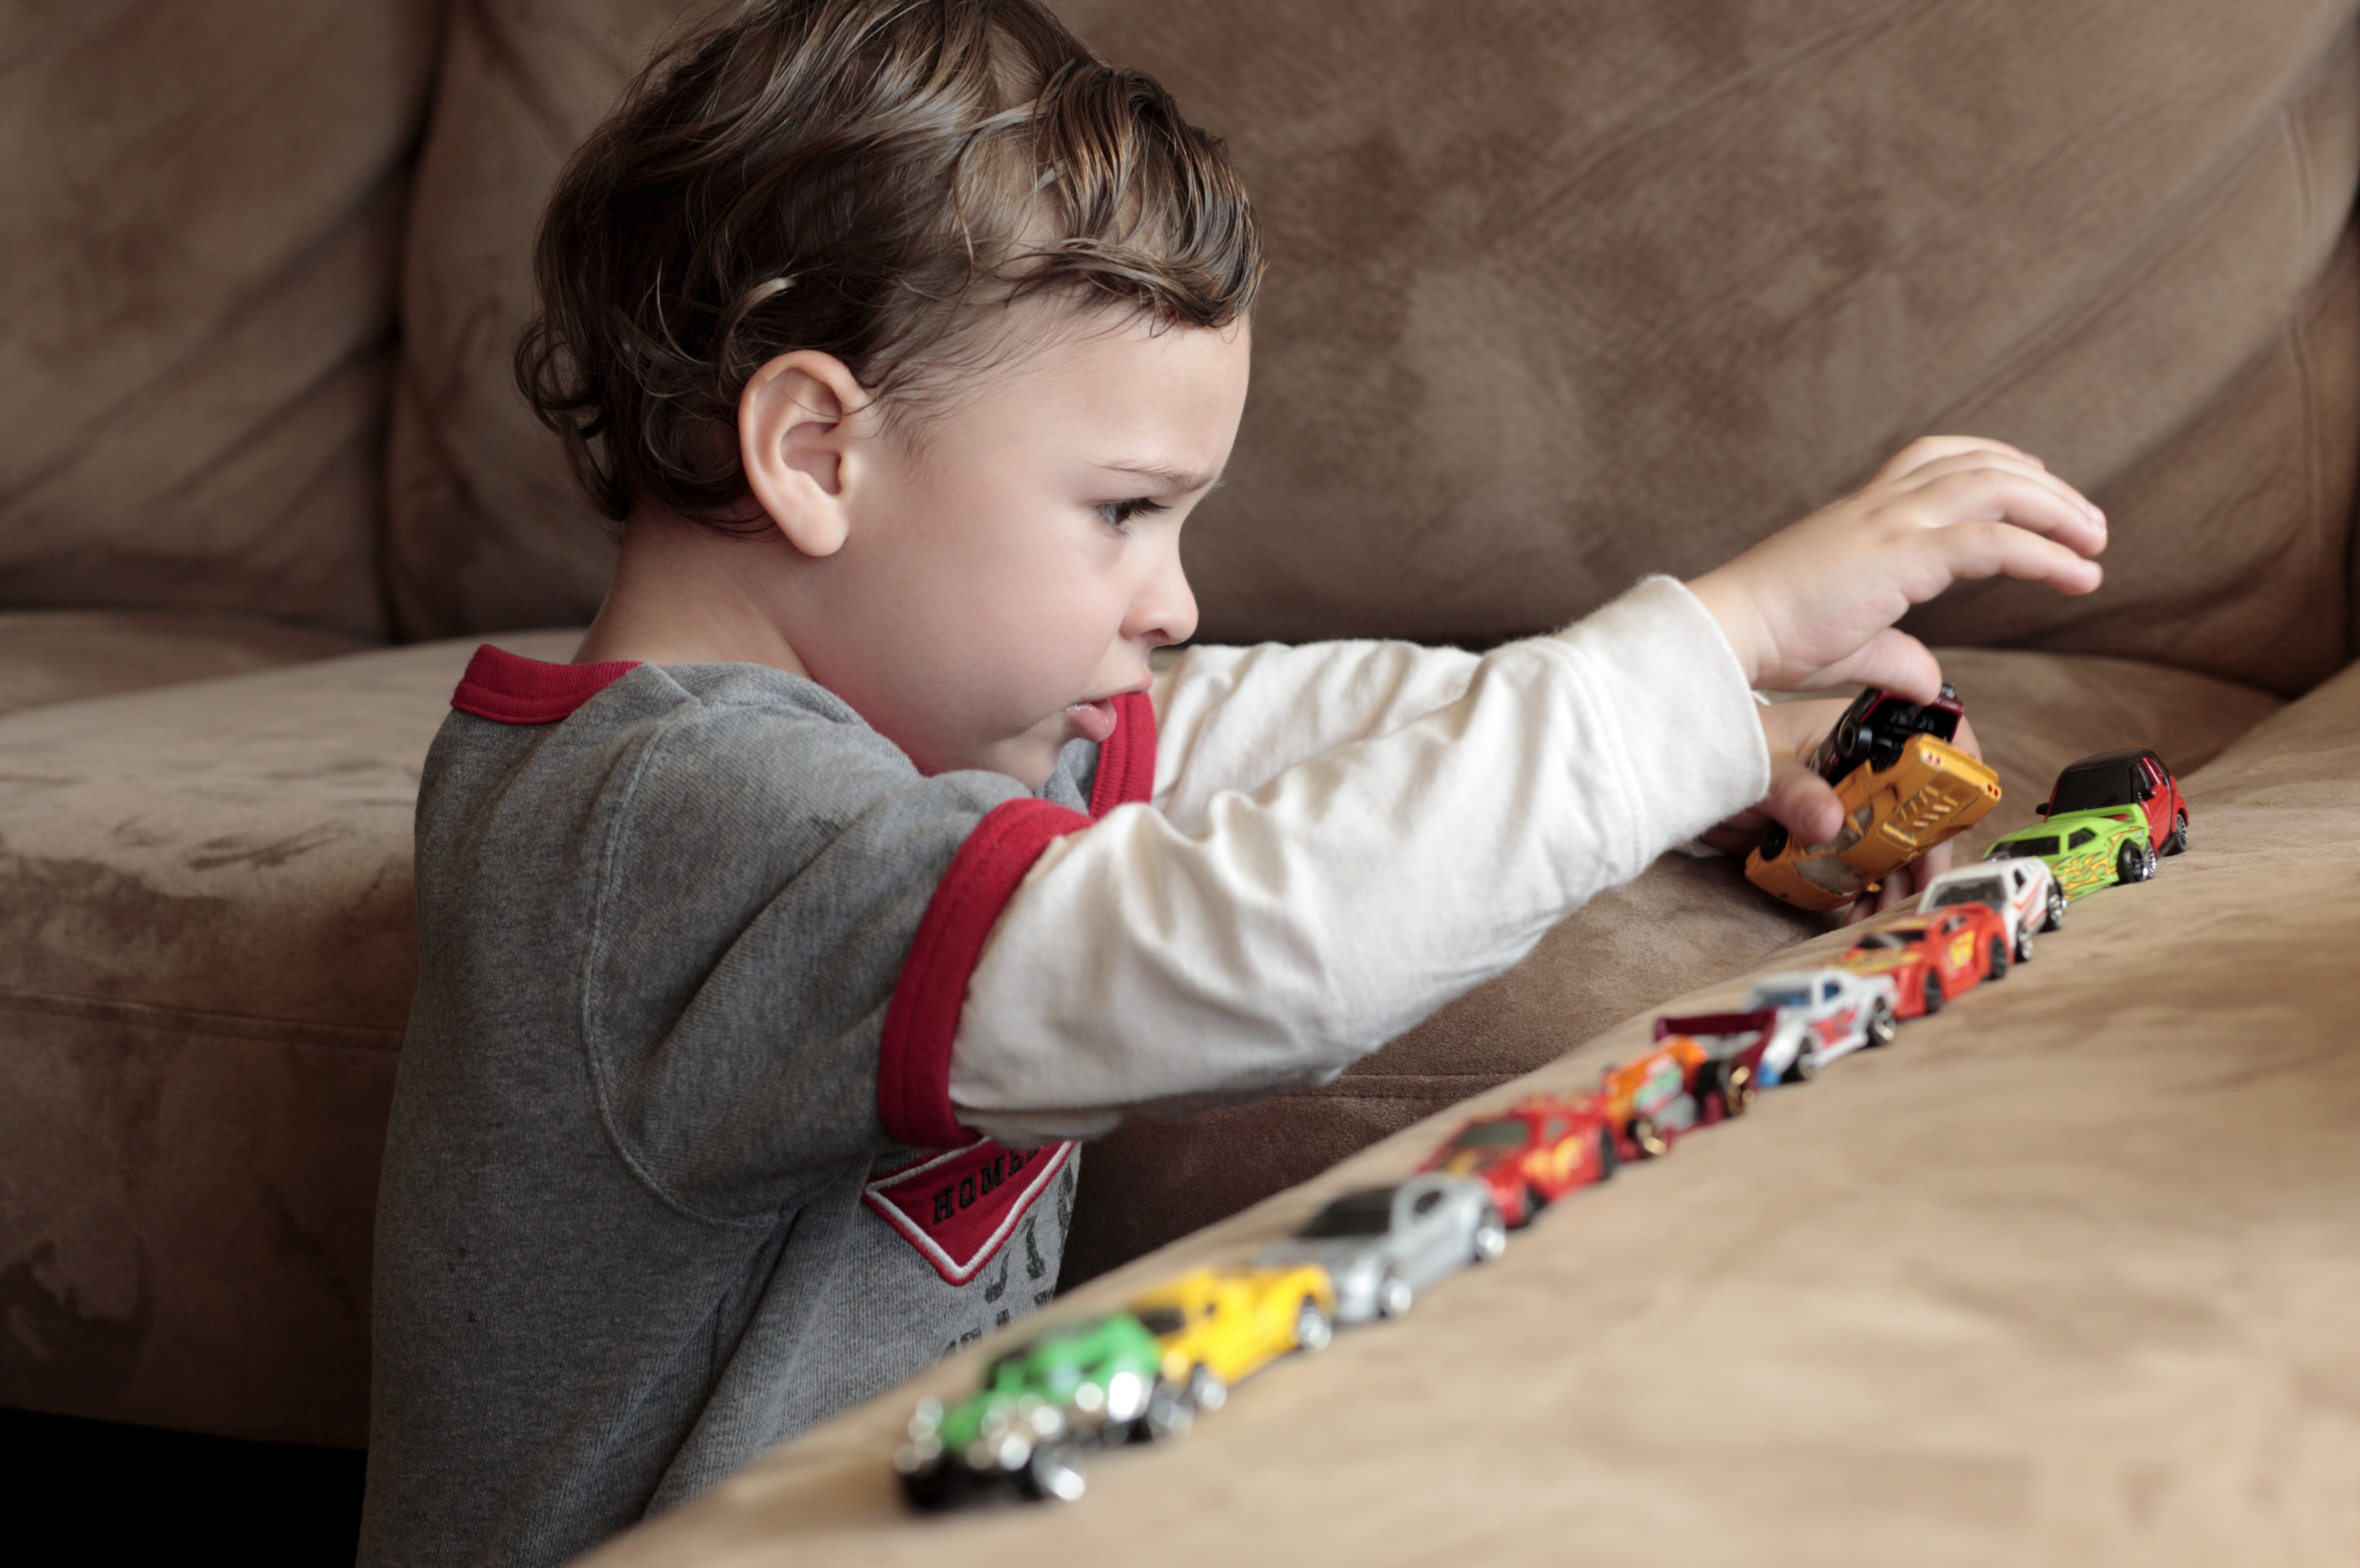 Autistic boy playing with toy cars